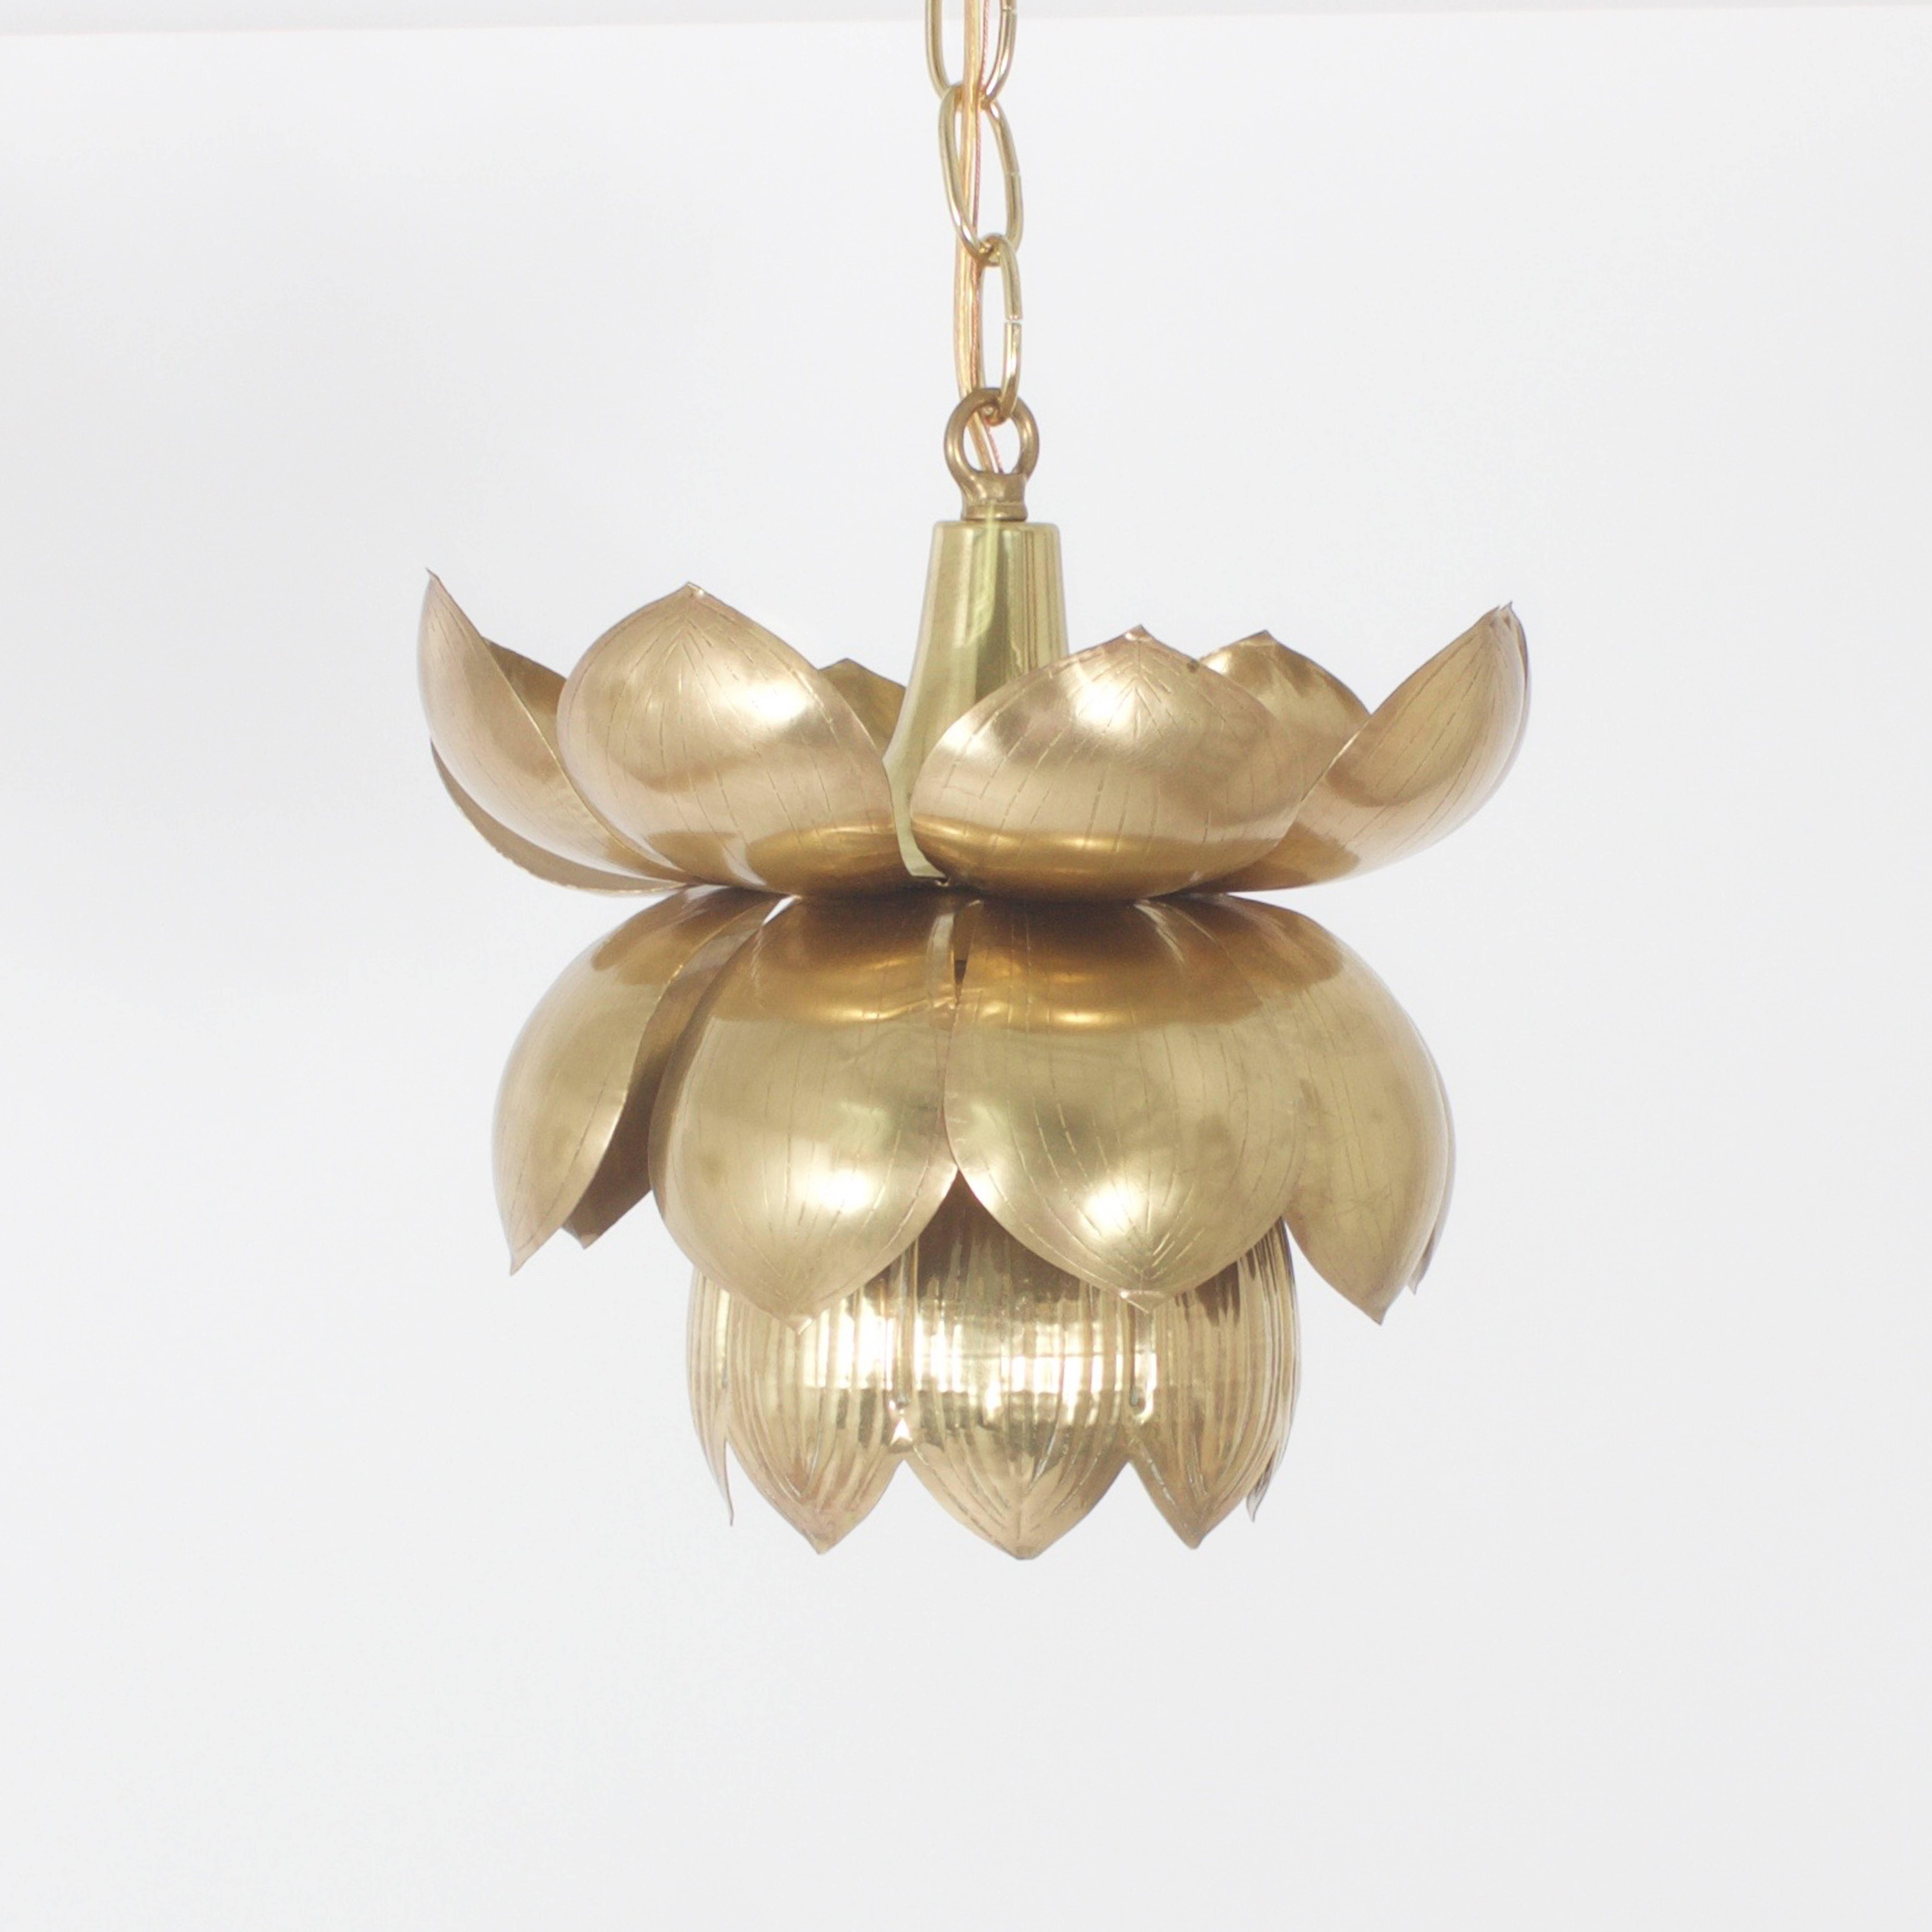 Set of three chic brass lotus lights or pendants with an exotic and romantic flair. Brass pieces made in Hong Kong than manufactured with a single bulb socket by Feldman. Newly wired,  polished and lacquered for easy care. Individually priced.